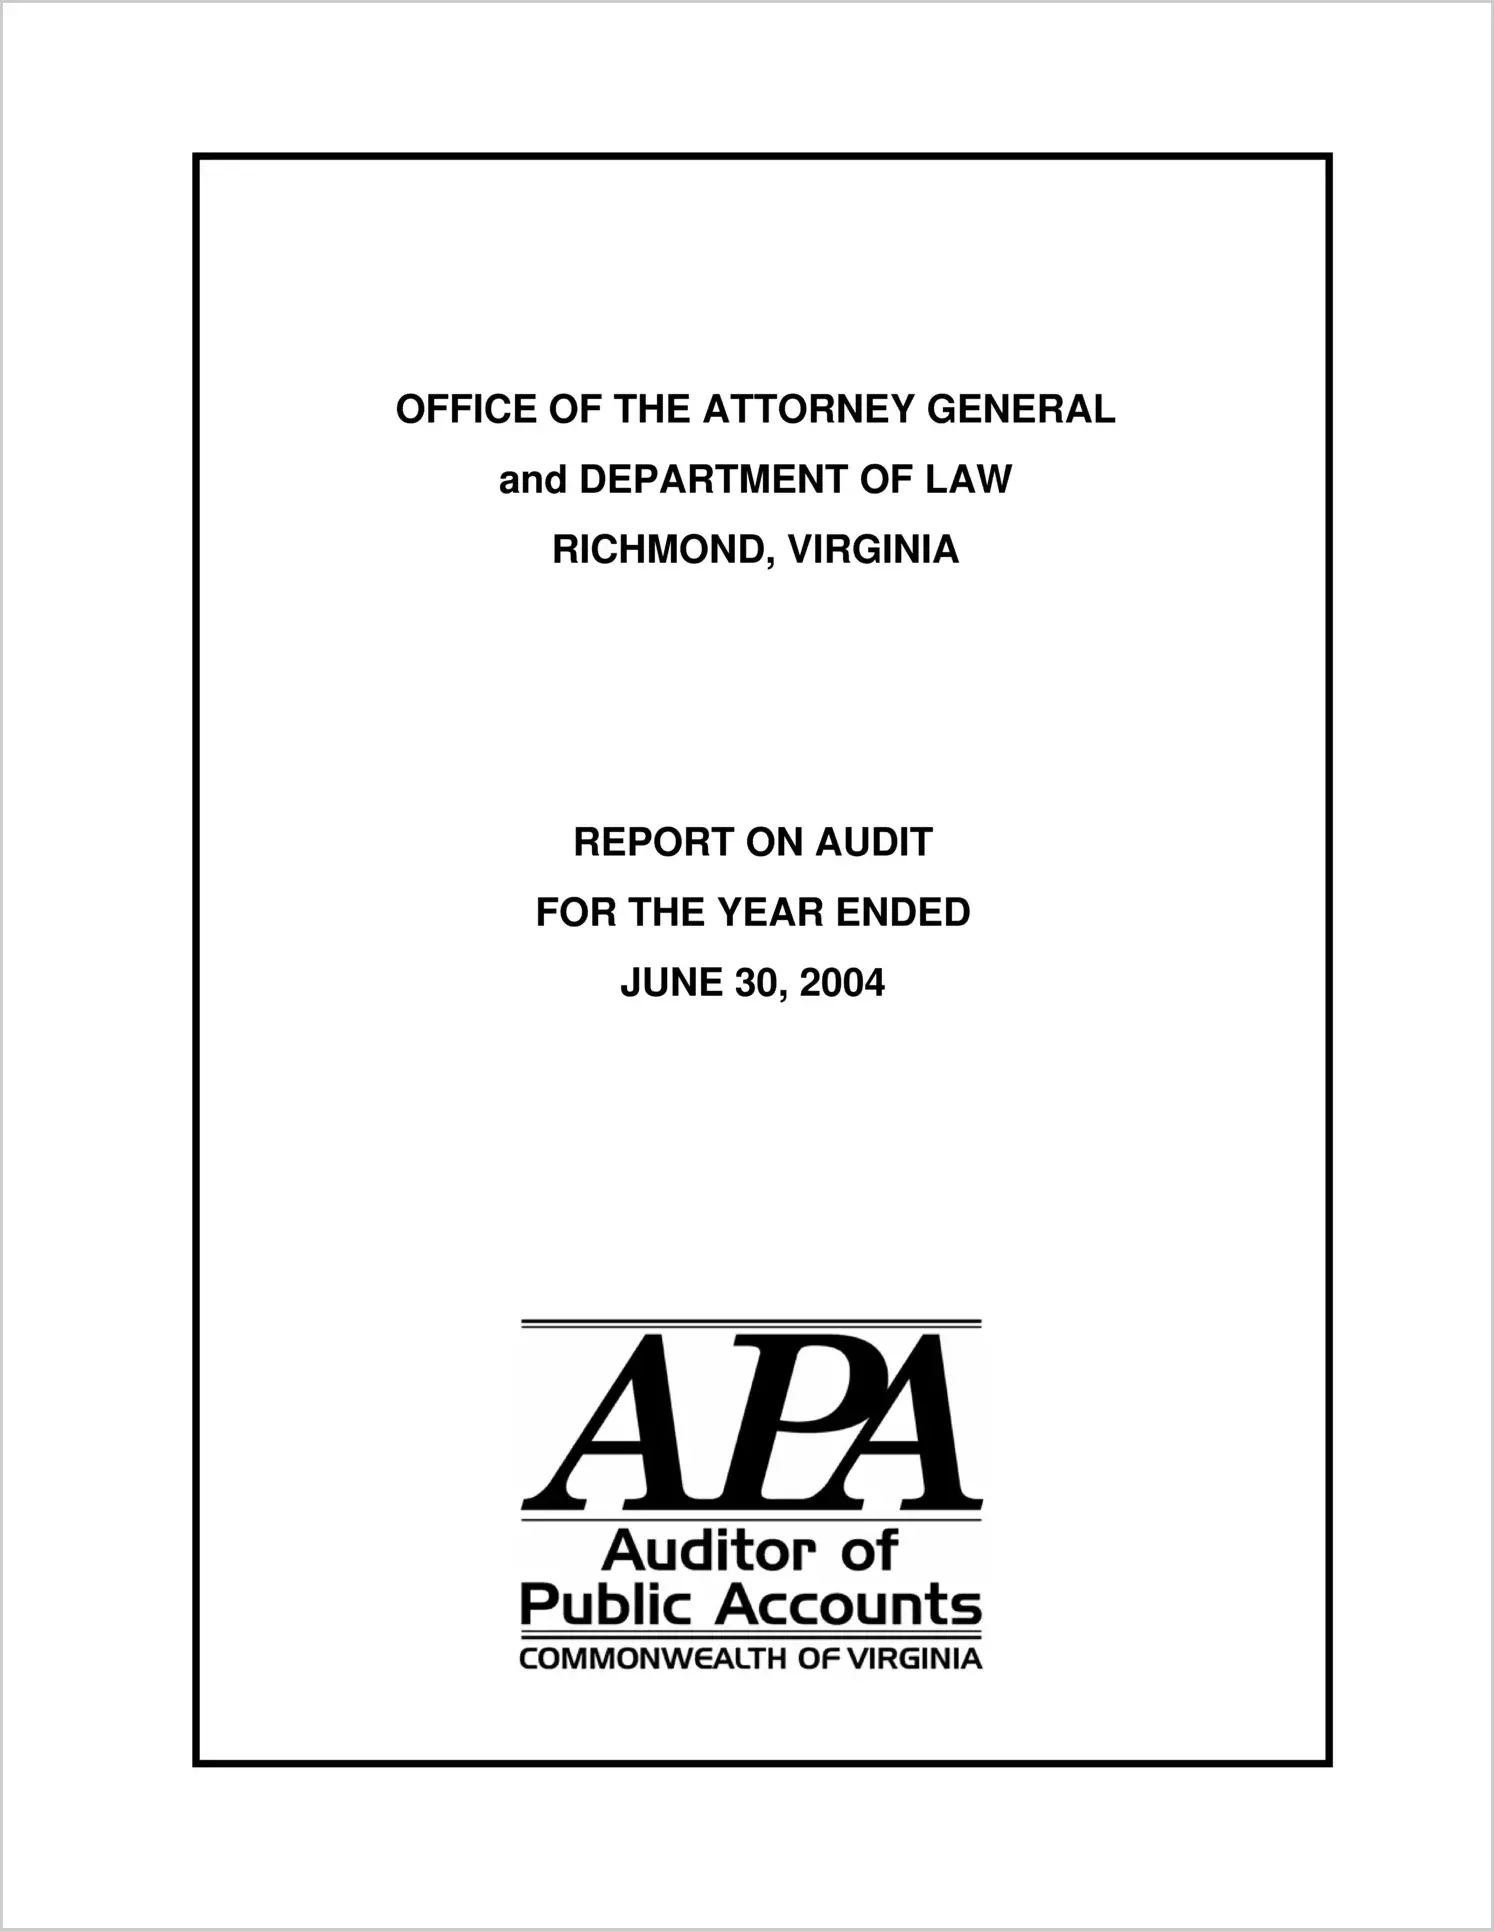 Office of the Attorney General for the year ended June 30, 2004